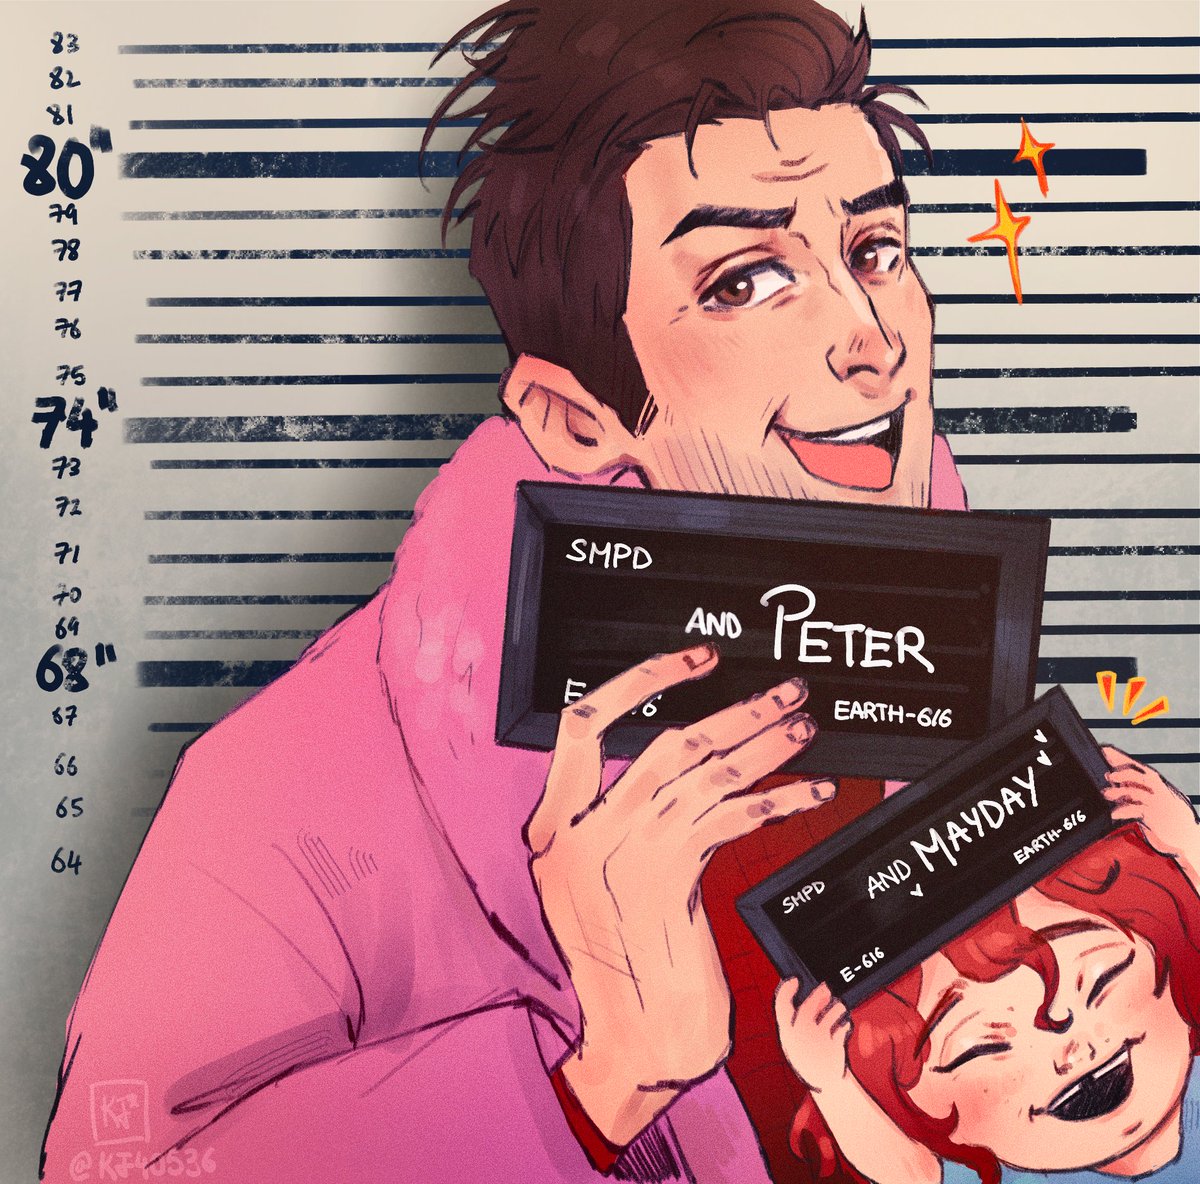 and here comes your two favorite dilfs
#SpiderVerse #MiguelOHara #PeterBParker #barbiememe #AcrossTheSpiderVerse